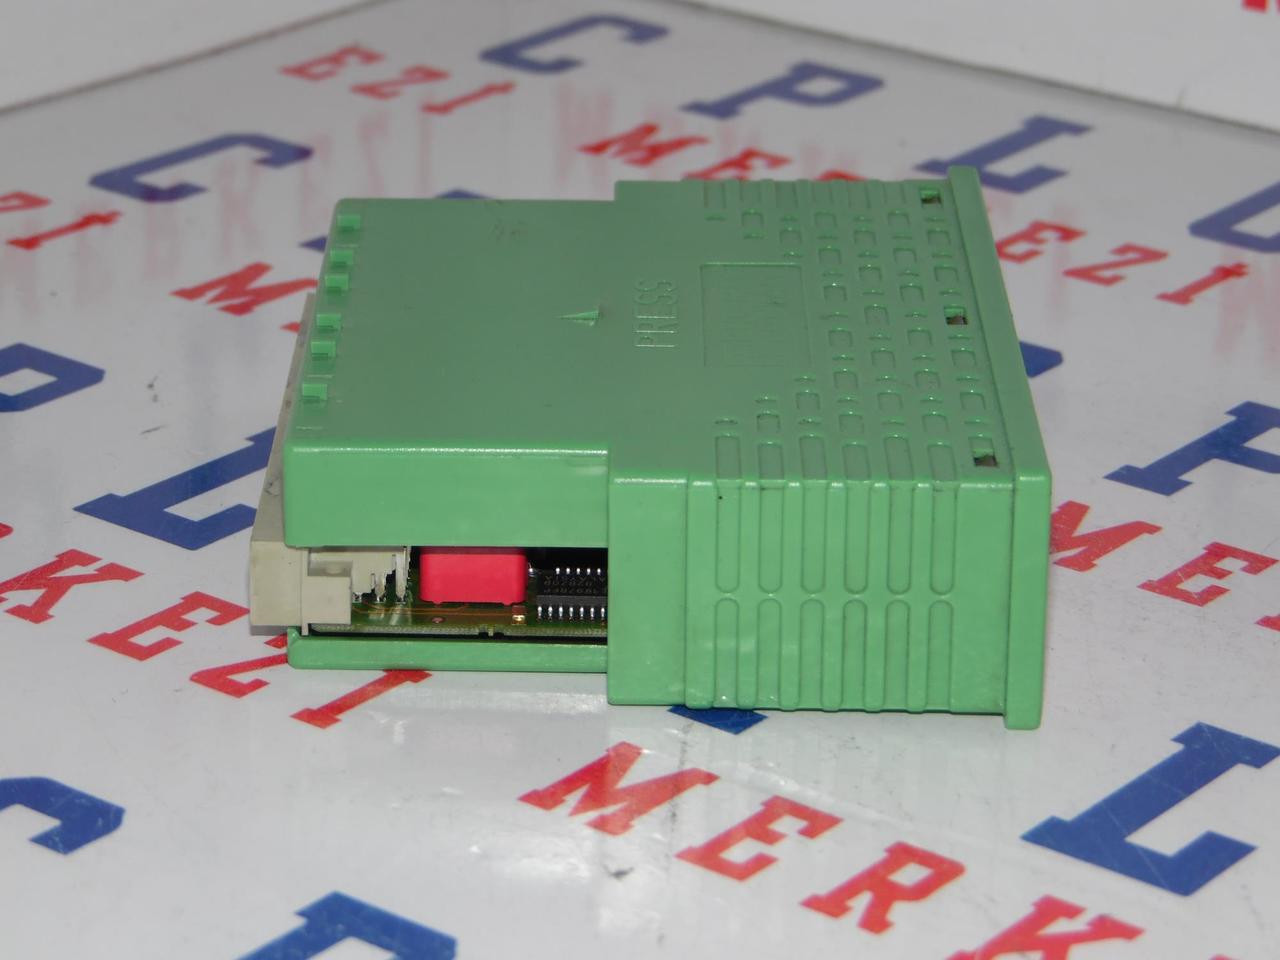 IB-STME-24-DO-322, IBSTME24DO322 PHOENIX CONTACT DIG. OUTPUT MODULE